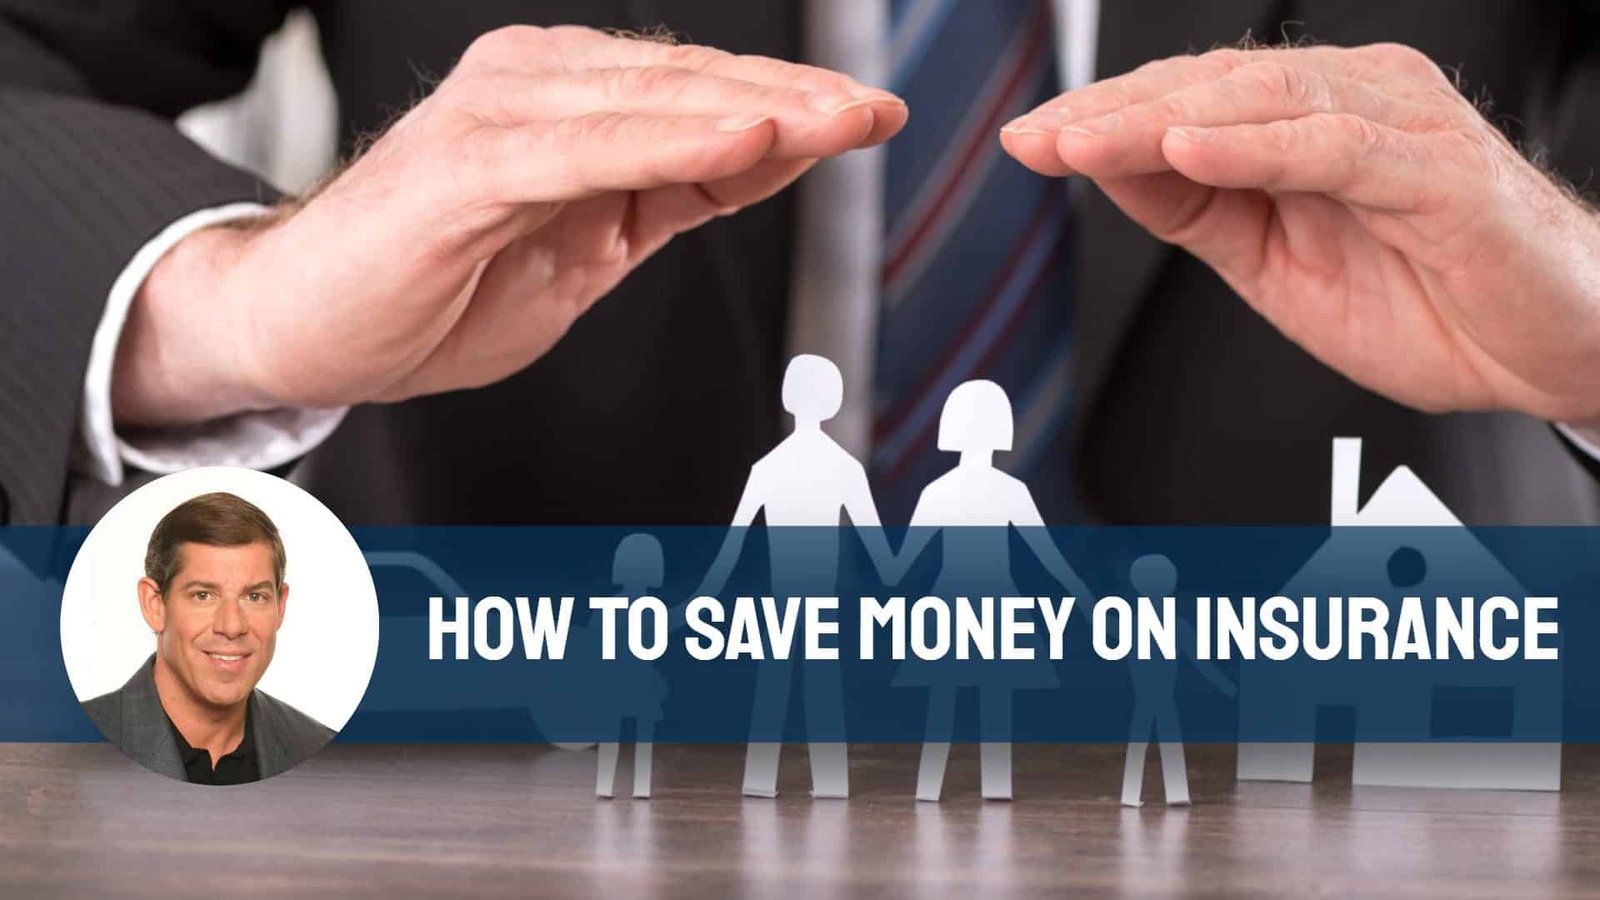 How To Save Money On Insurance